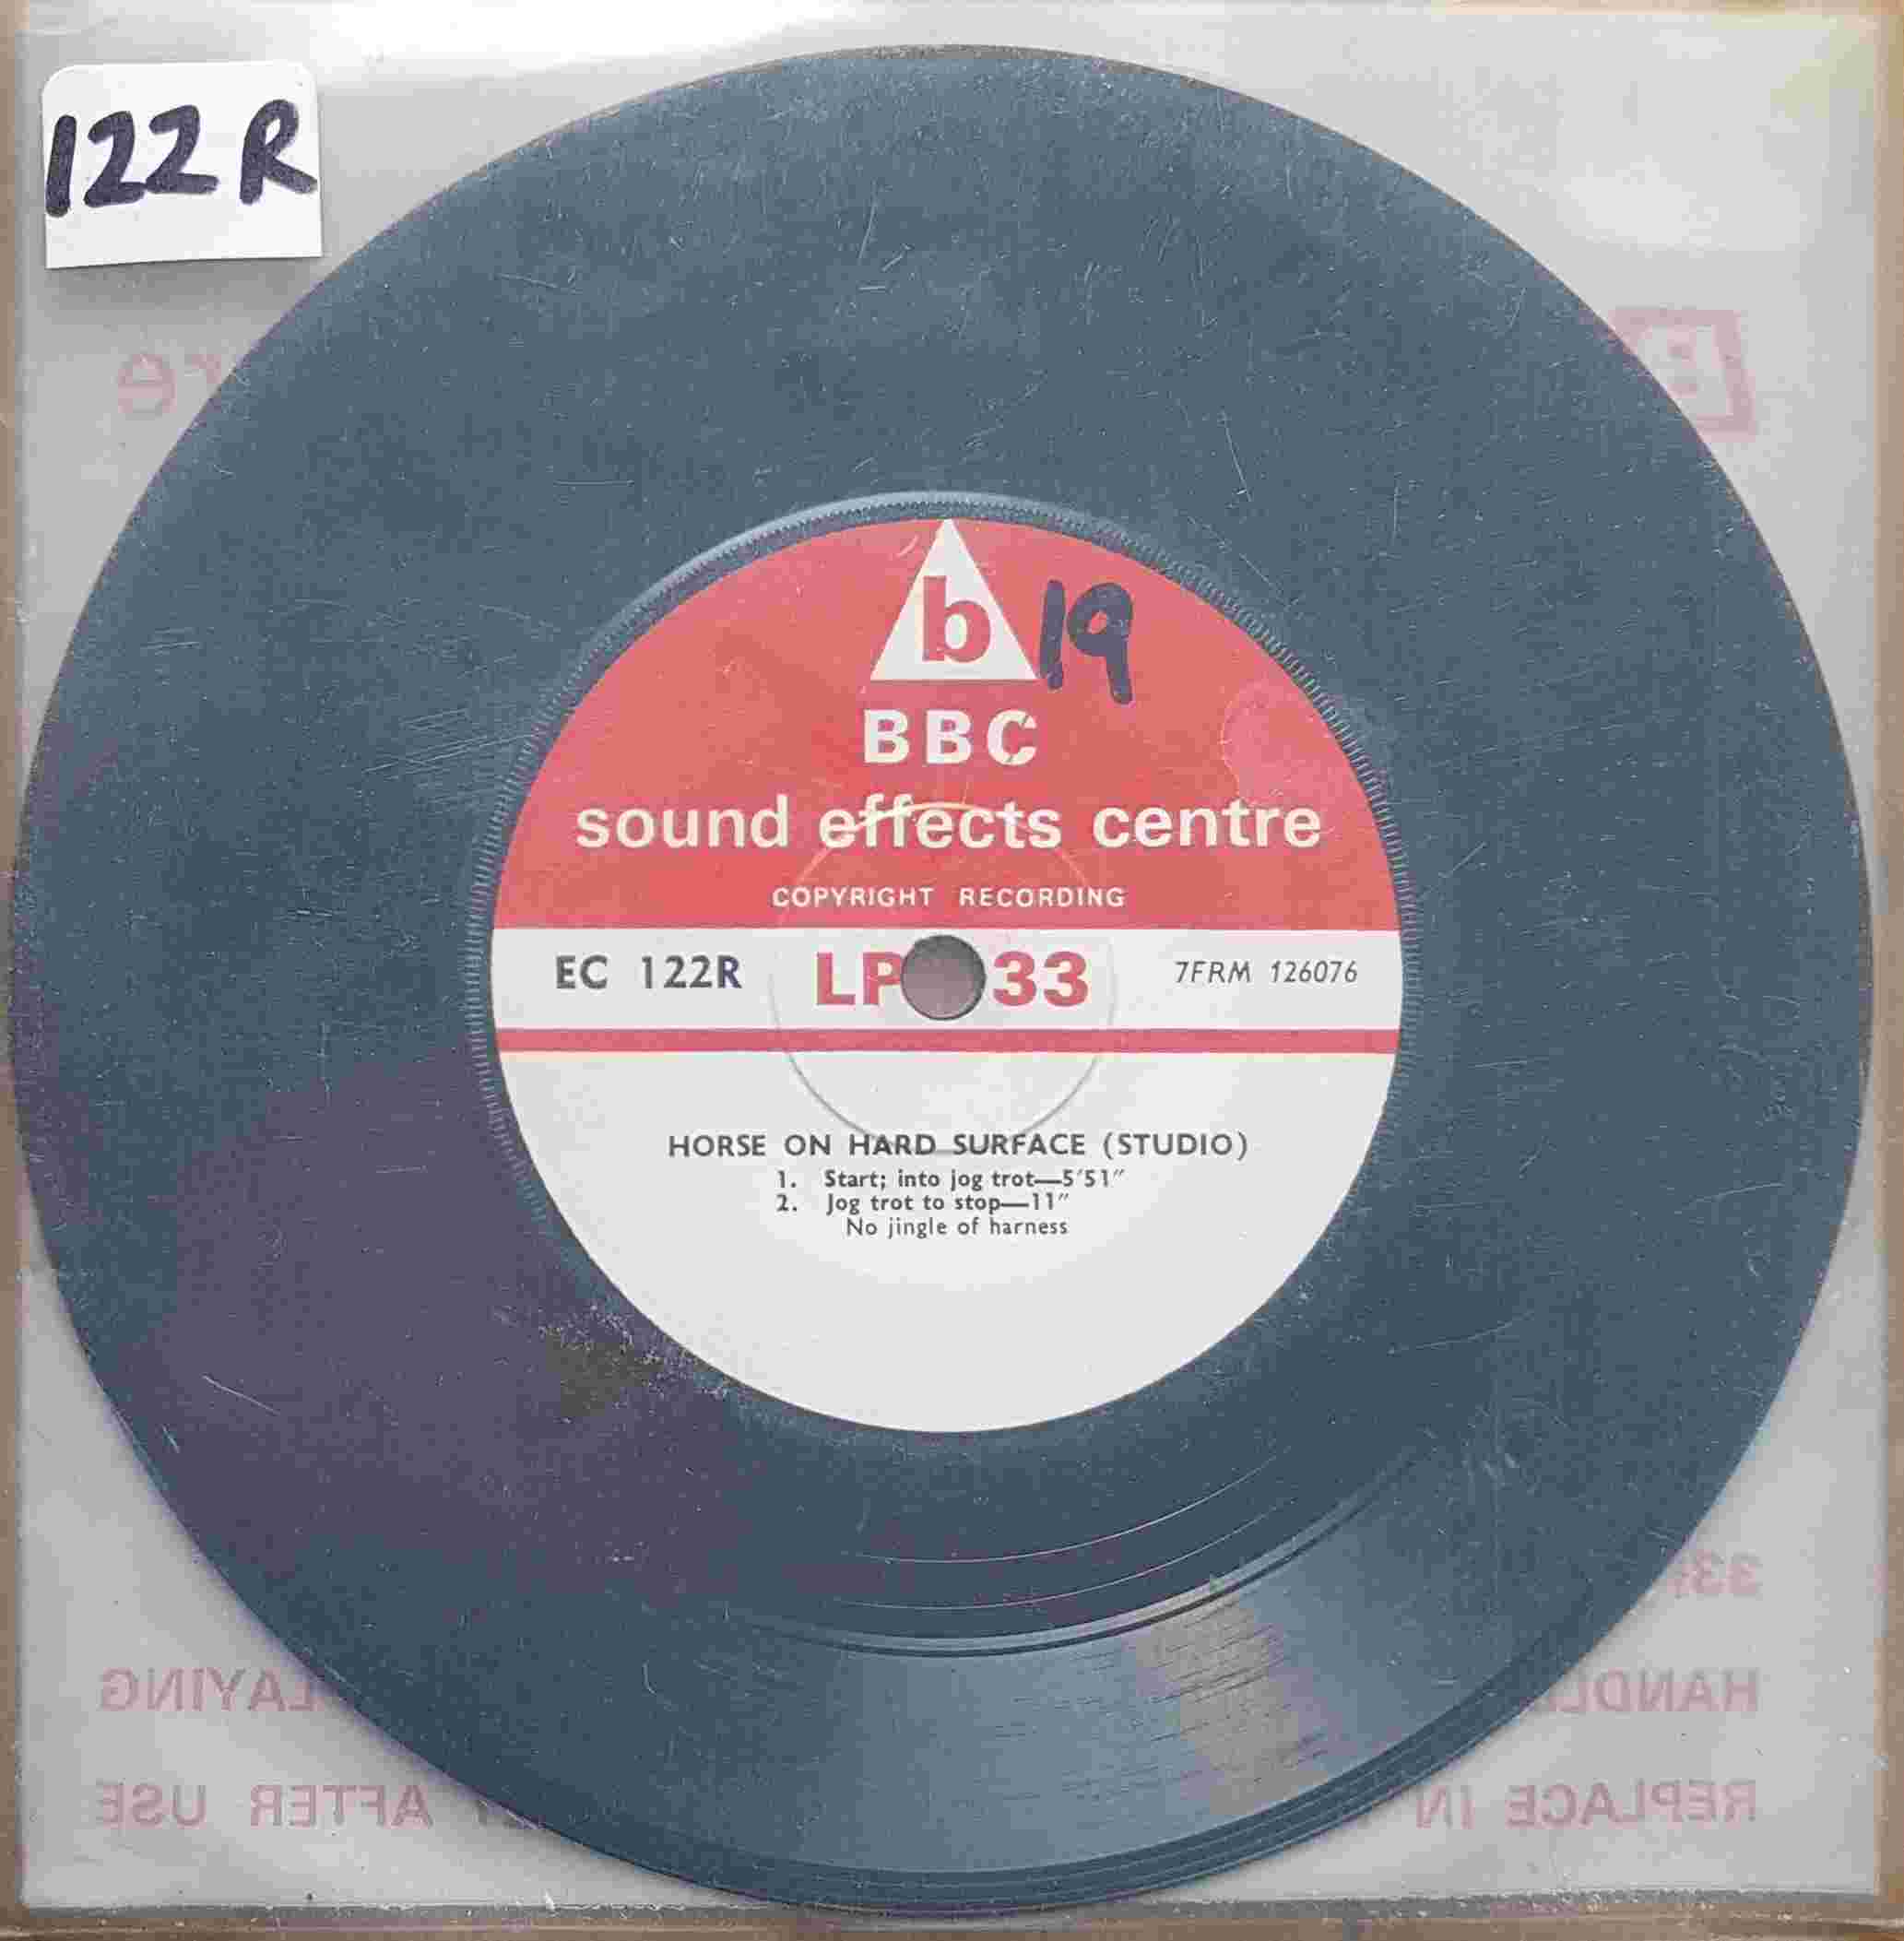 Picture of EC 122R Horse on hard surface (Studio) - No jingle or harness by artist Not registered from the BBC records and Tapes library